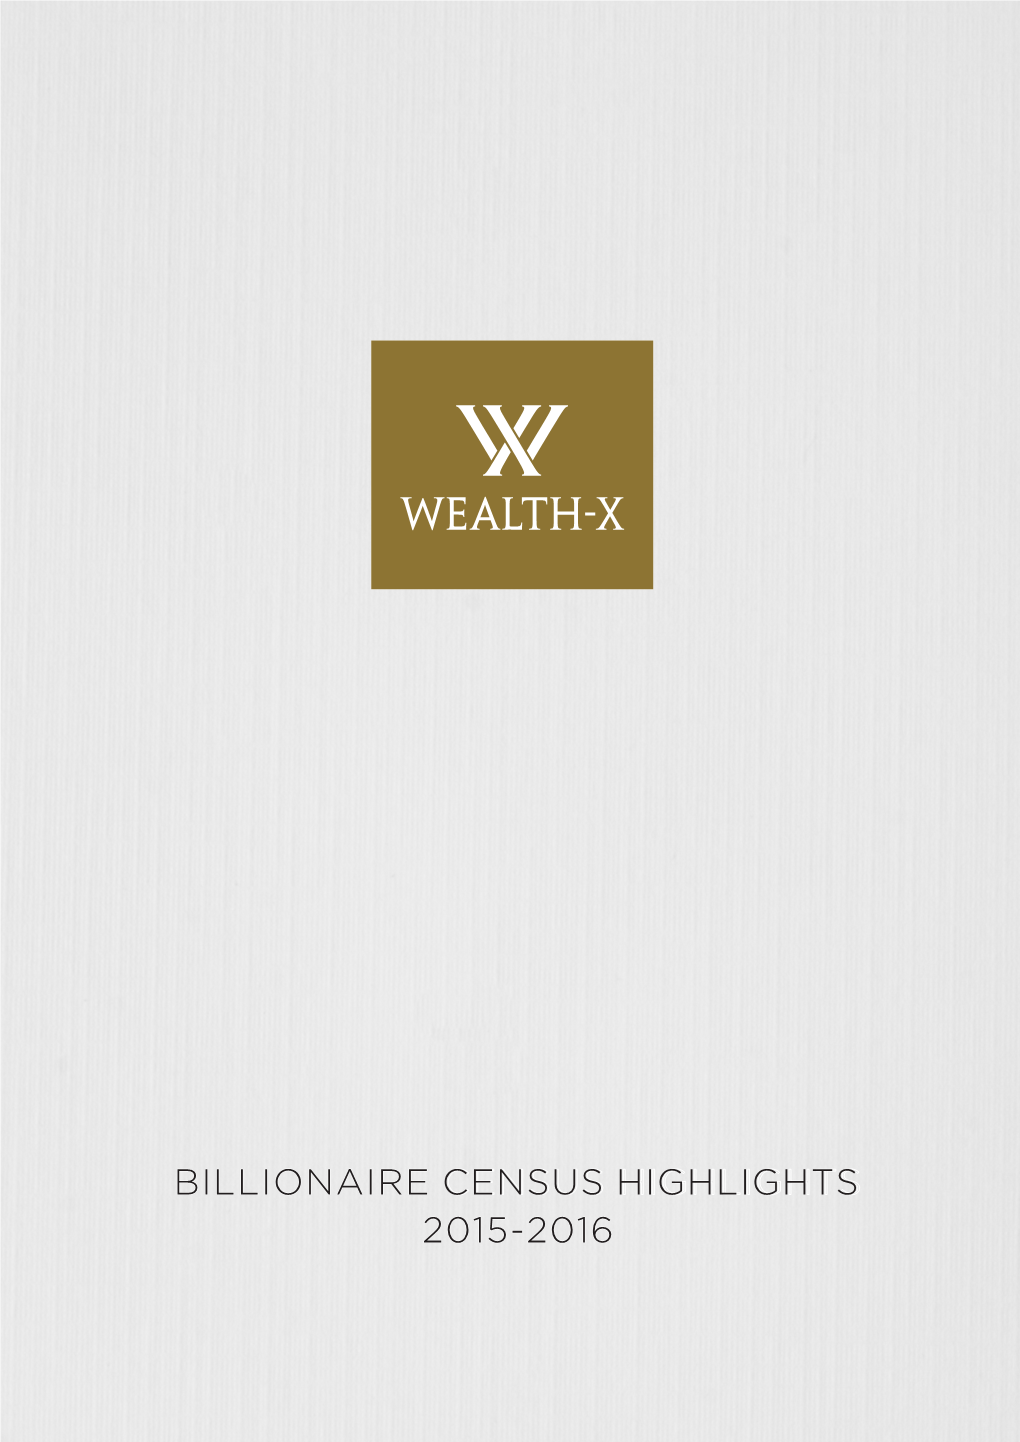 BILLIONAIRE CENSUS HIGHLIGHTS 2015-2016 Overview